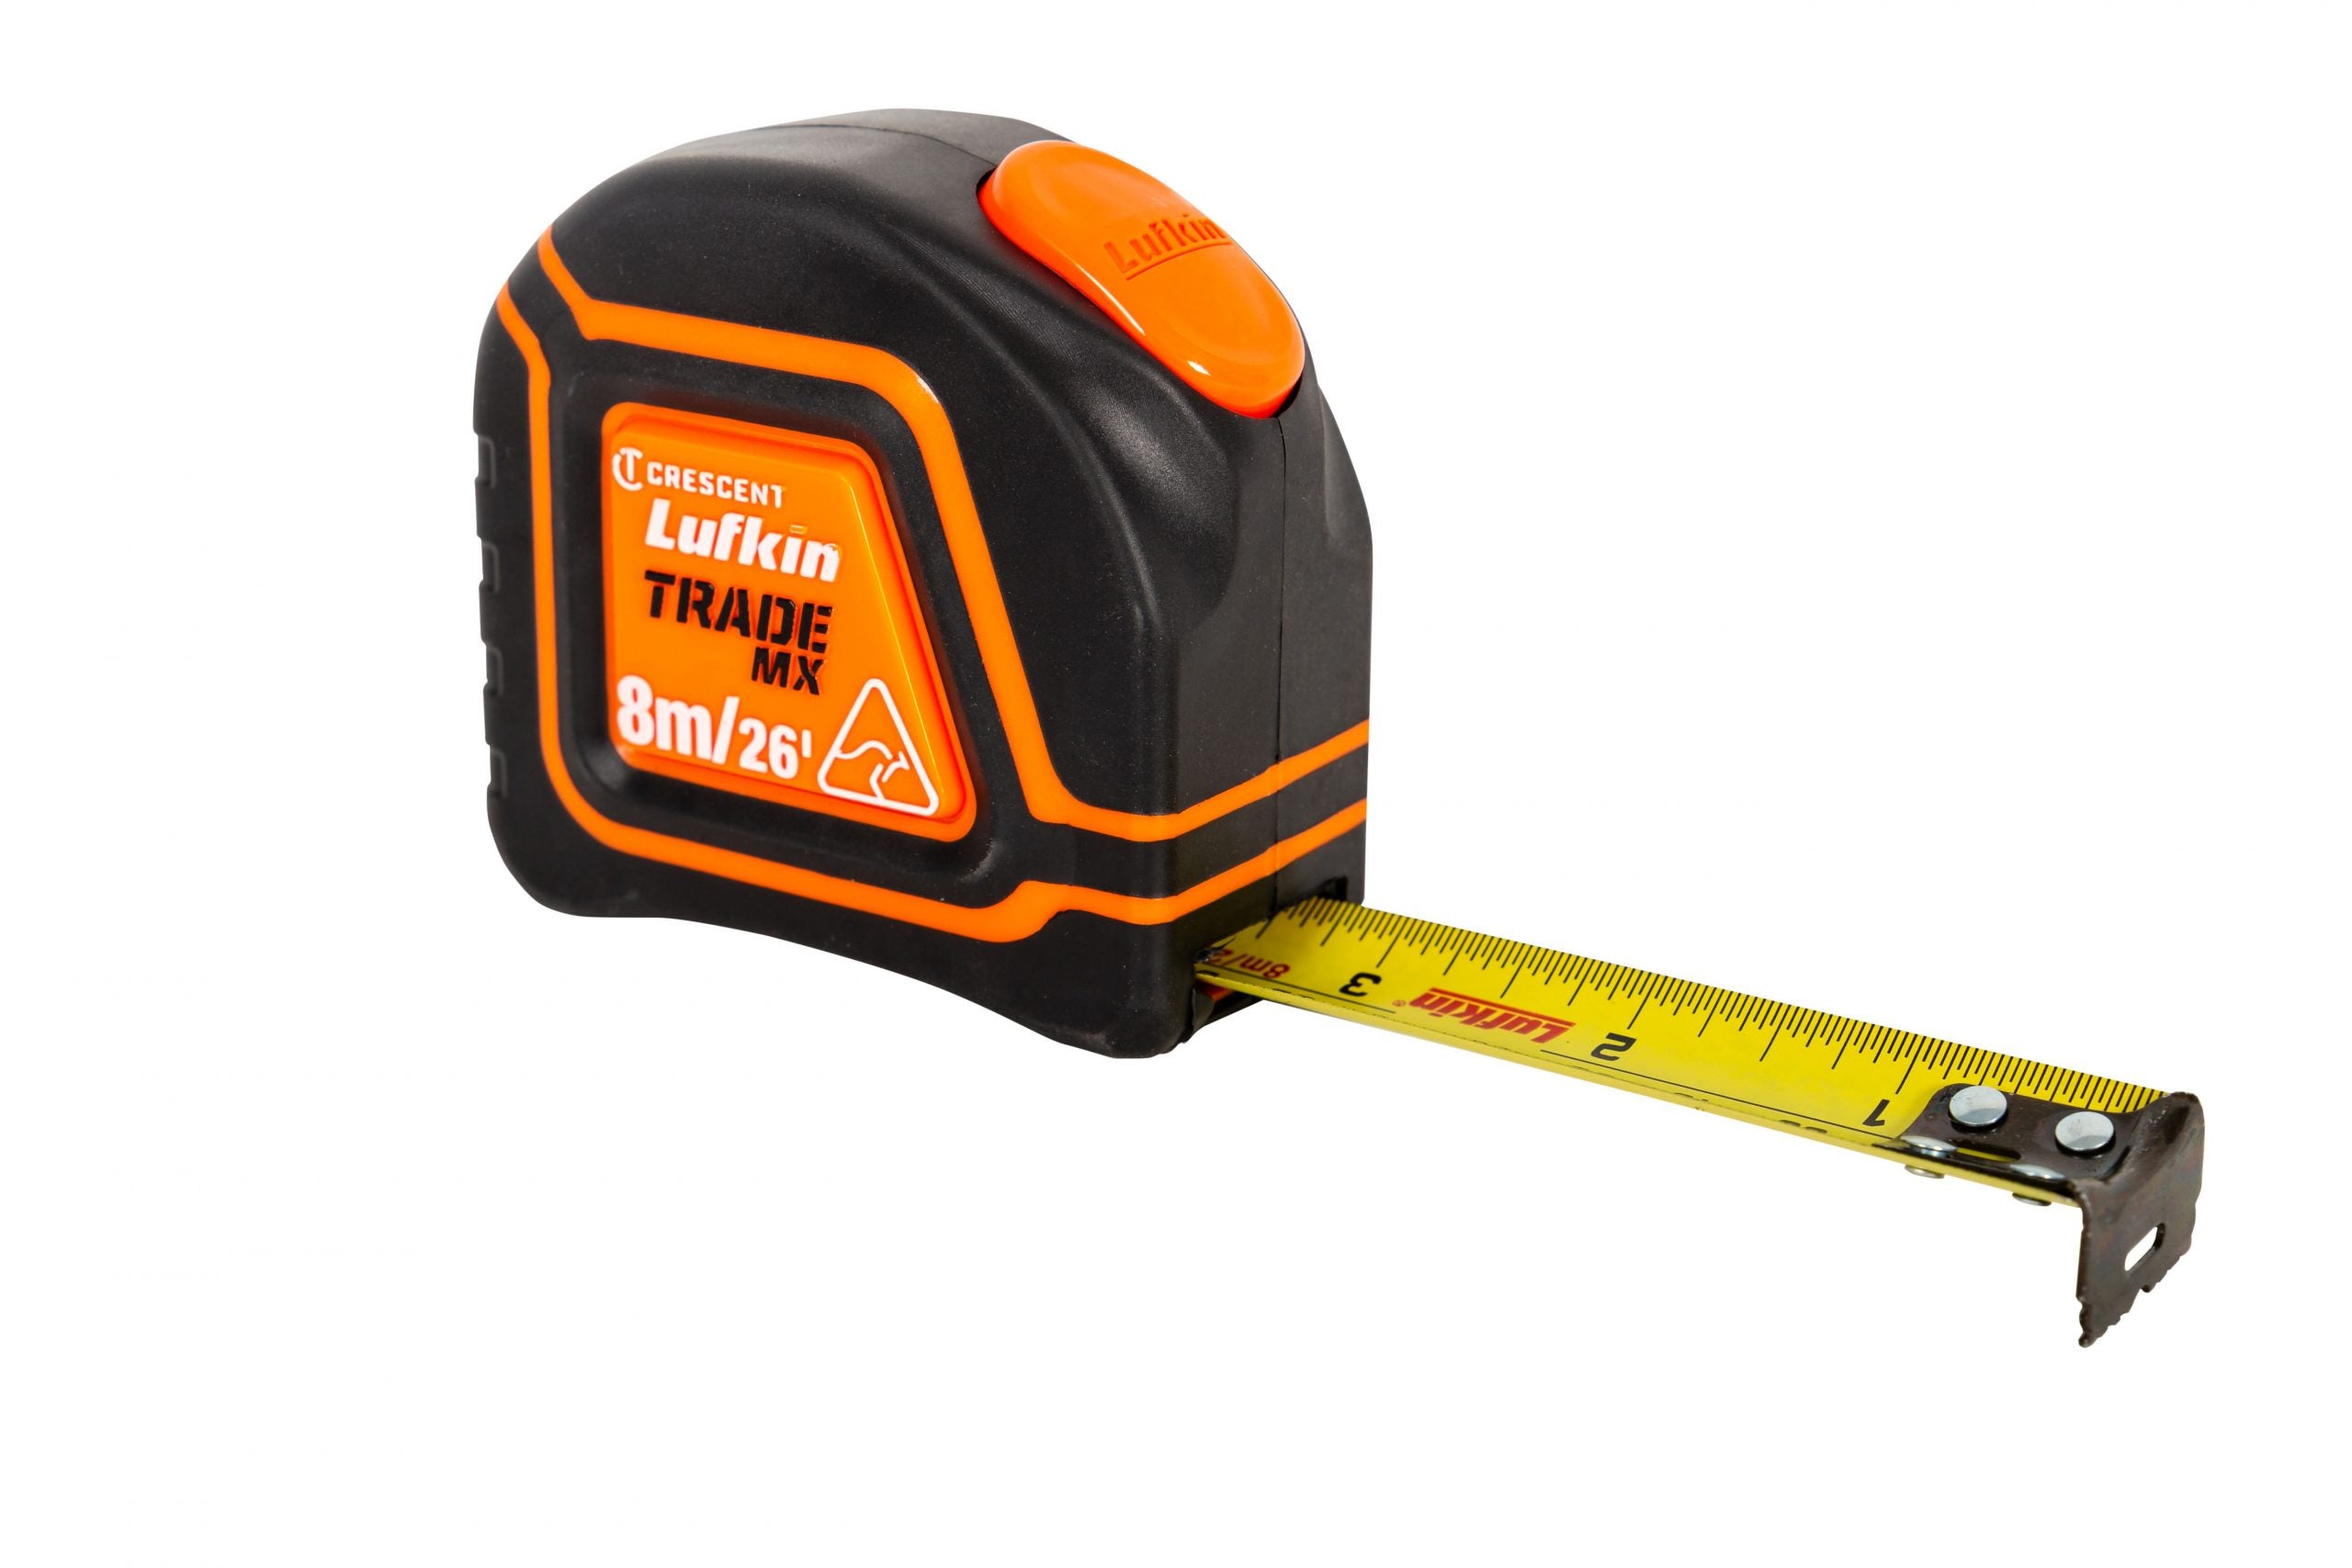 8m X 25mm Trade MX Tape Measure TM48ME10 by Lufkin